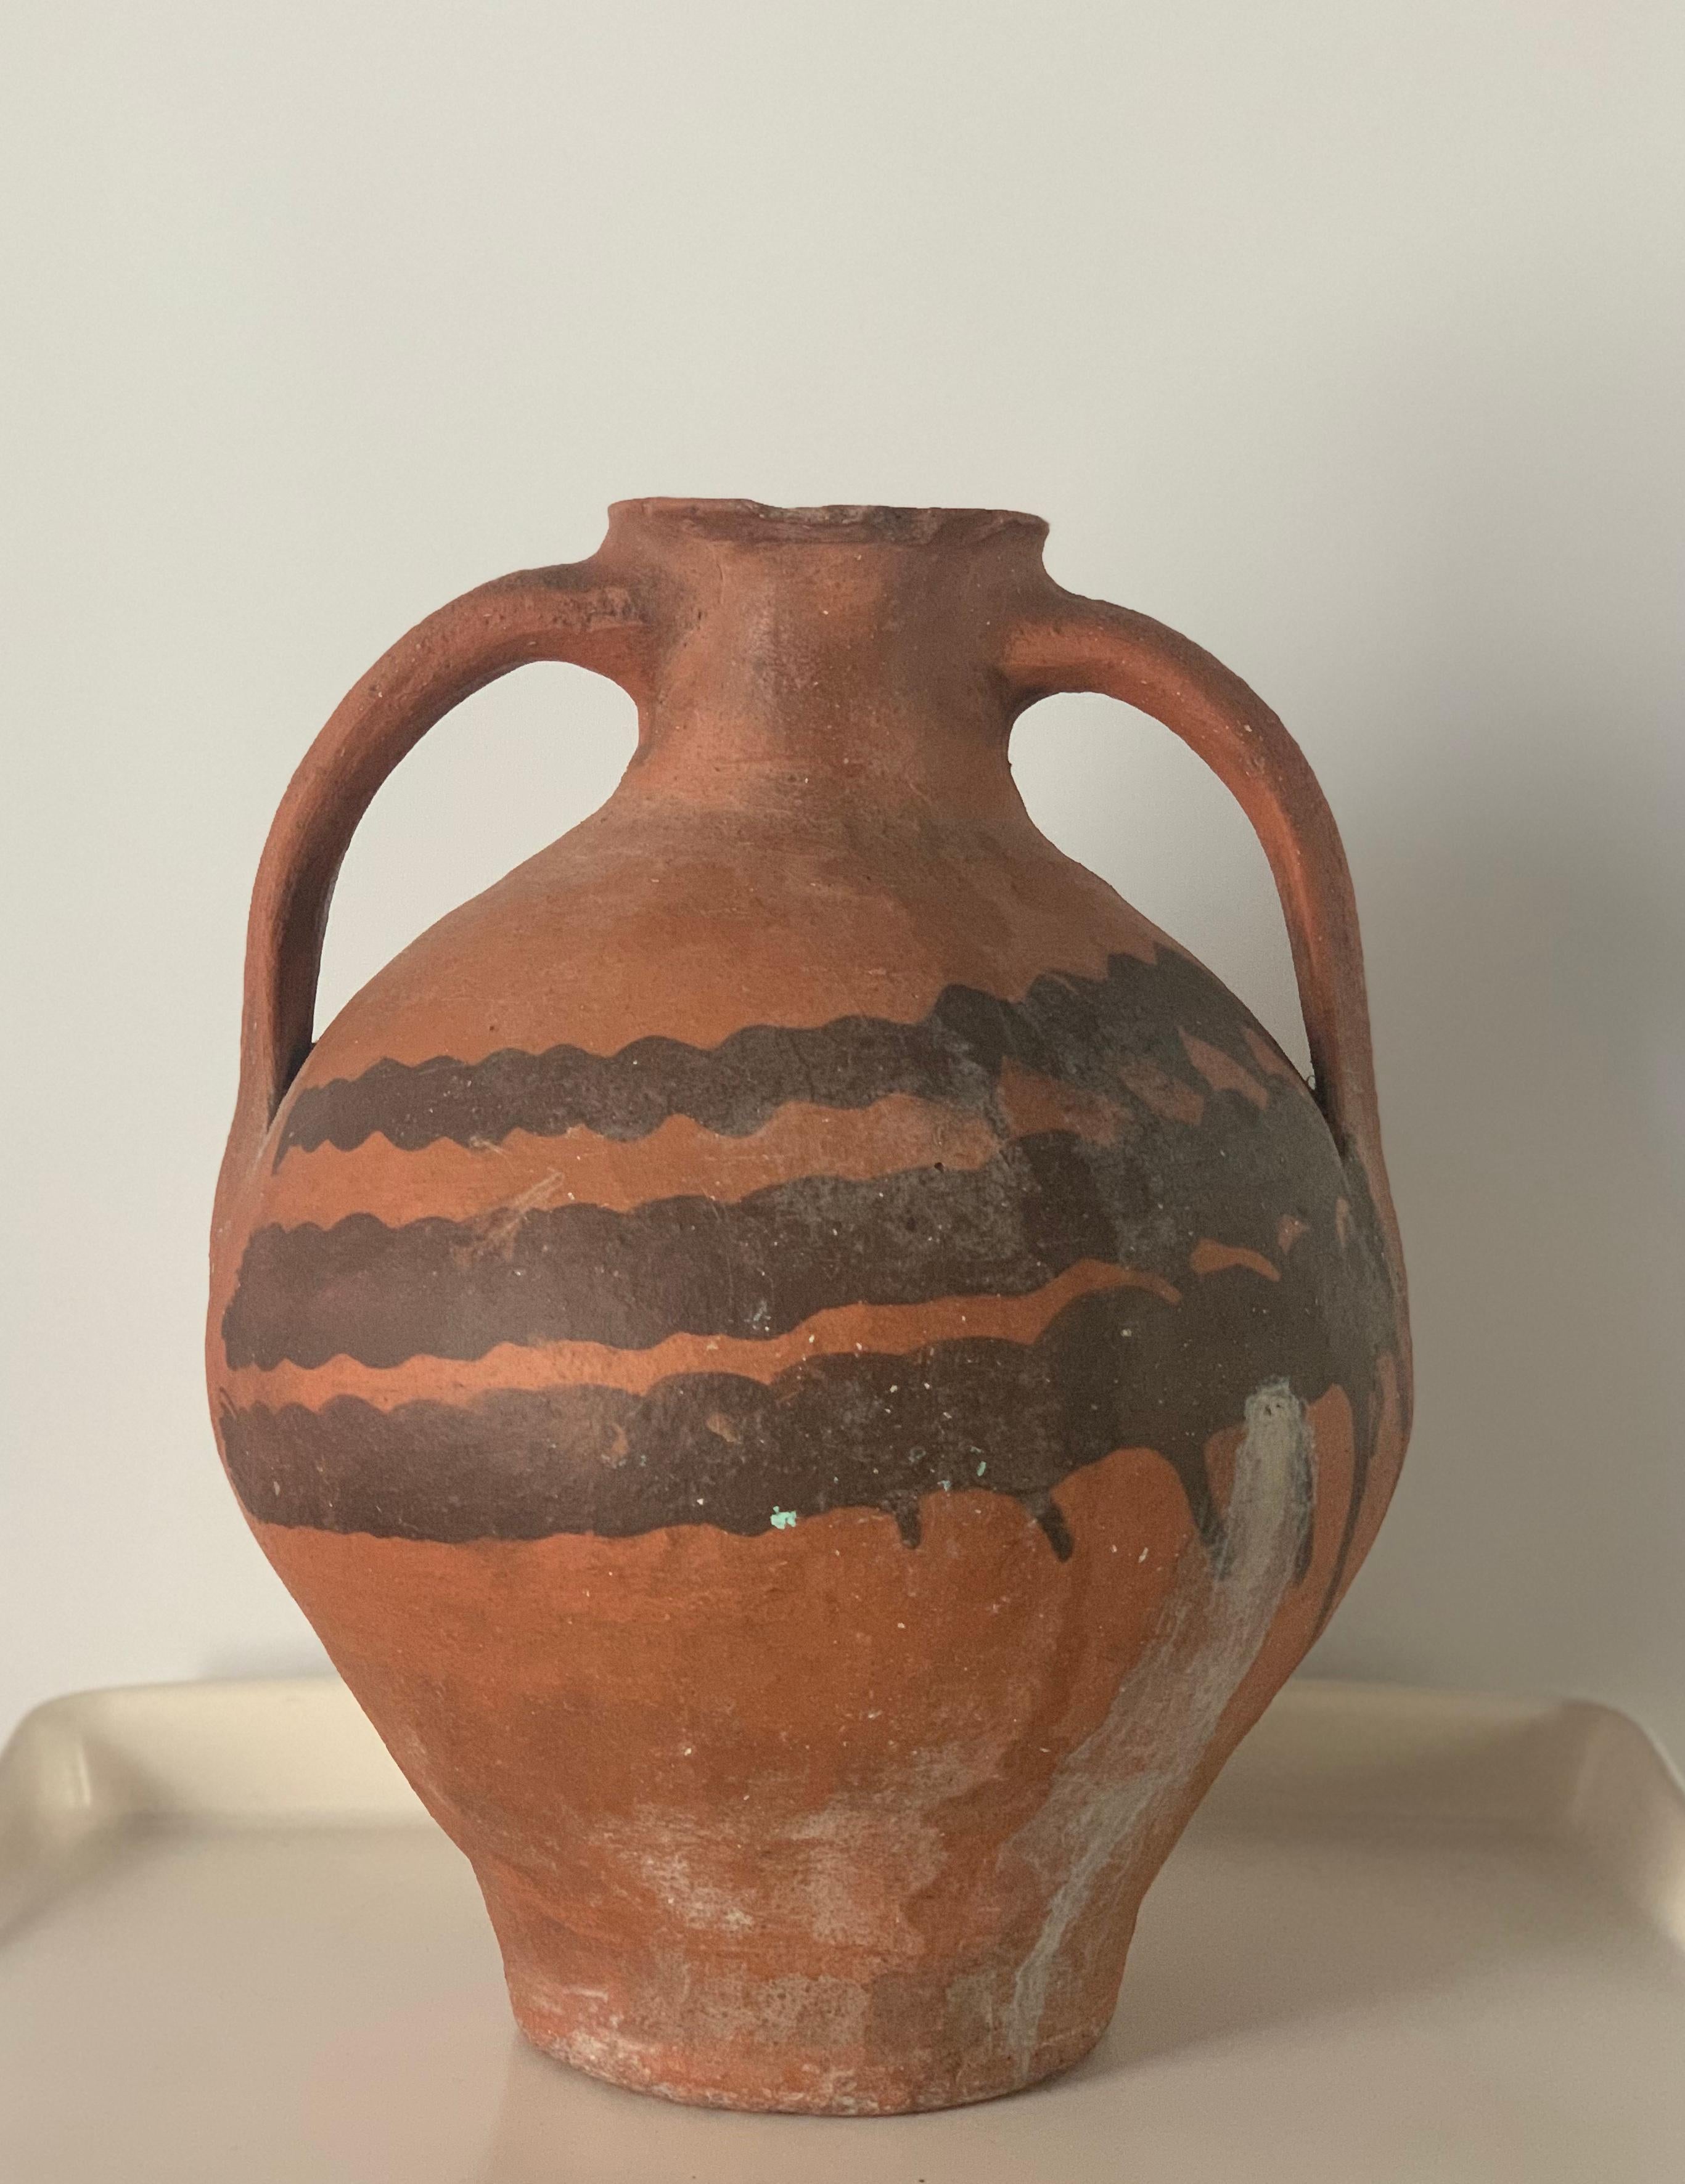 Rare red pitcher ‘cantaro’ from Calanda, Aragon-Zaragoza area of Spain, circa 1750 a rare piece from a Private collection. Other examples can be seen in the Museo de Zaragoza.
With gorgeous original patina, this jar features the characteristic